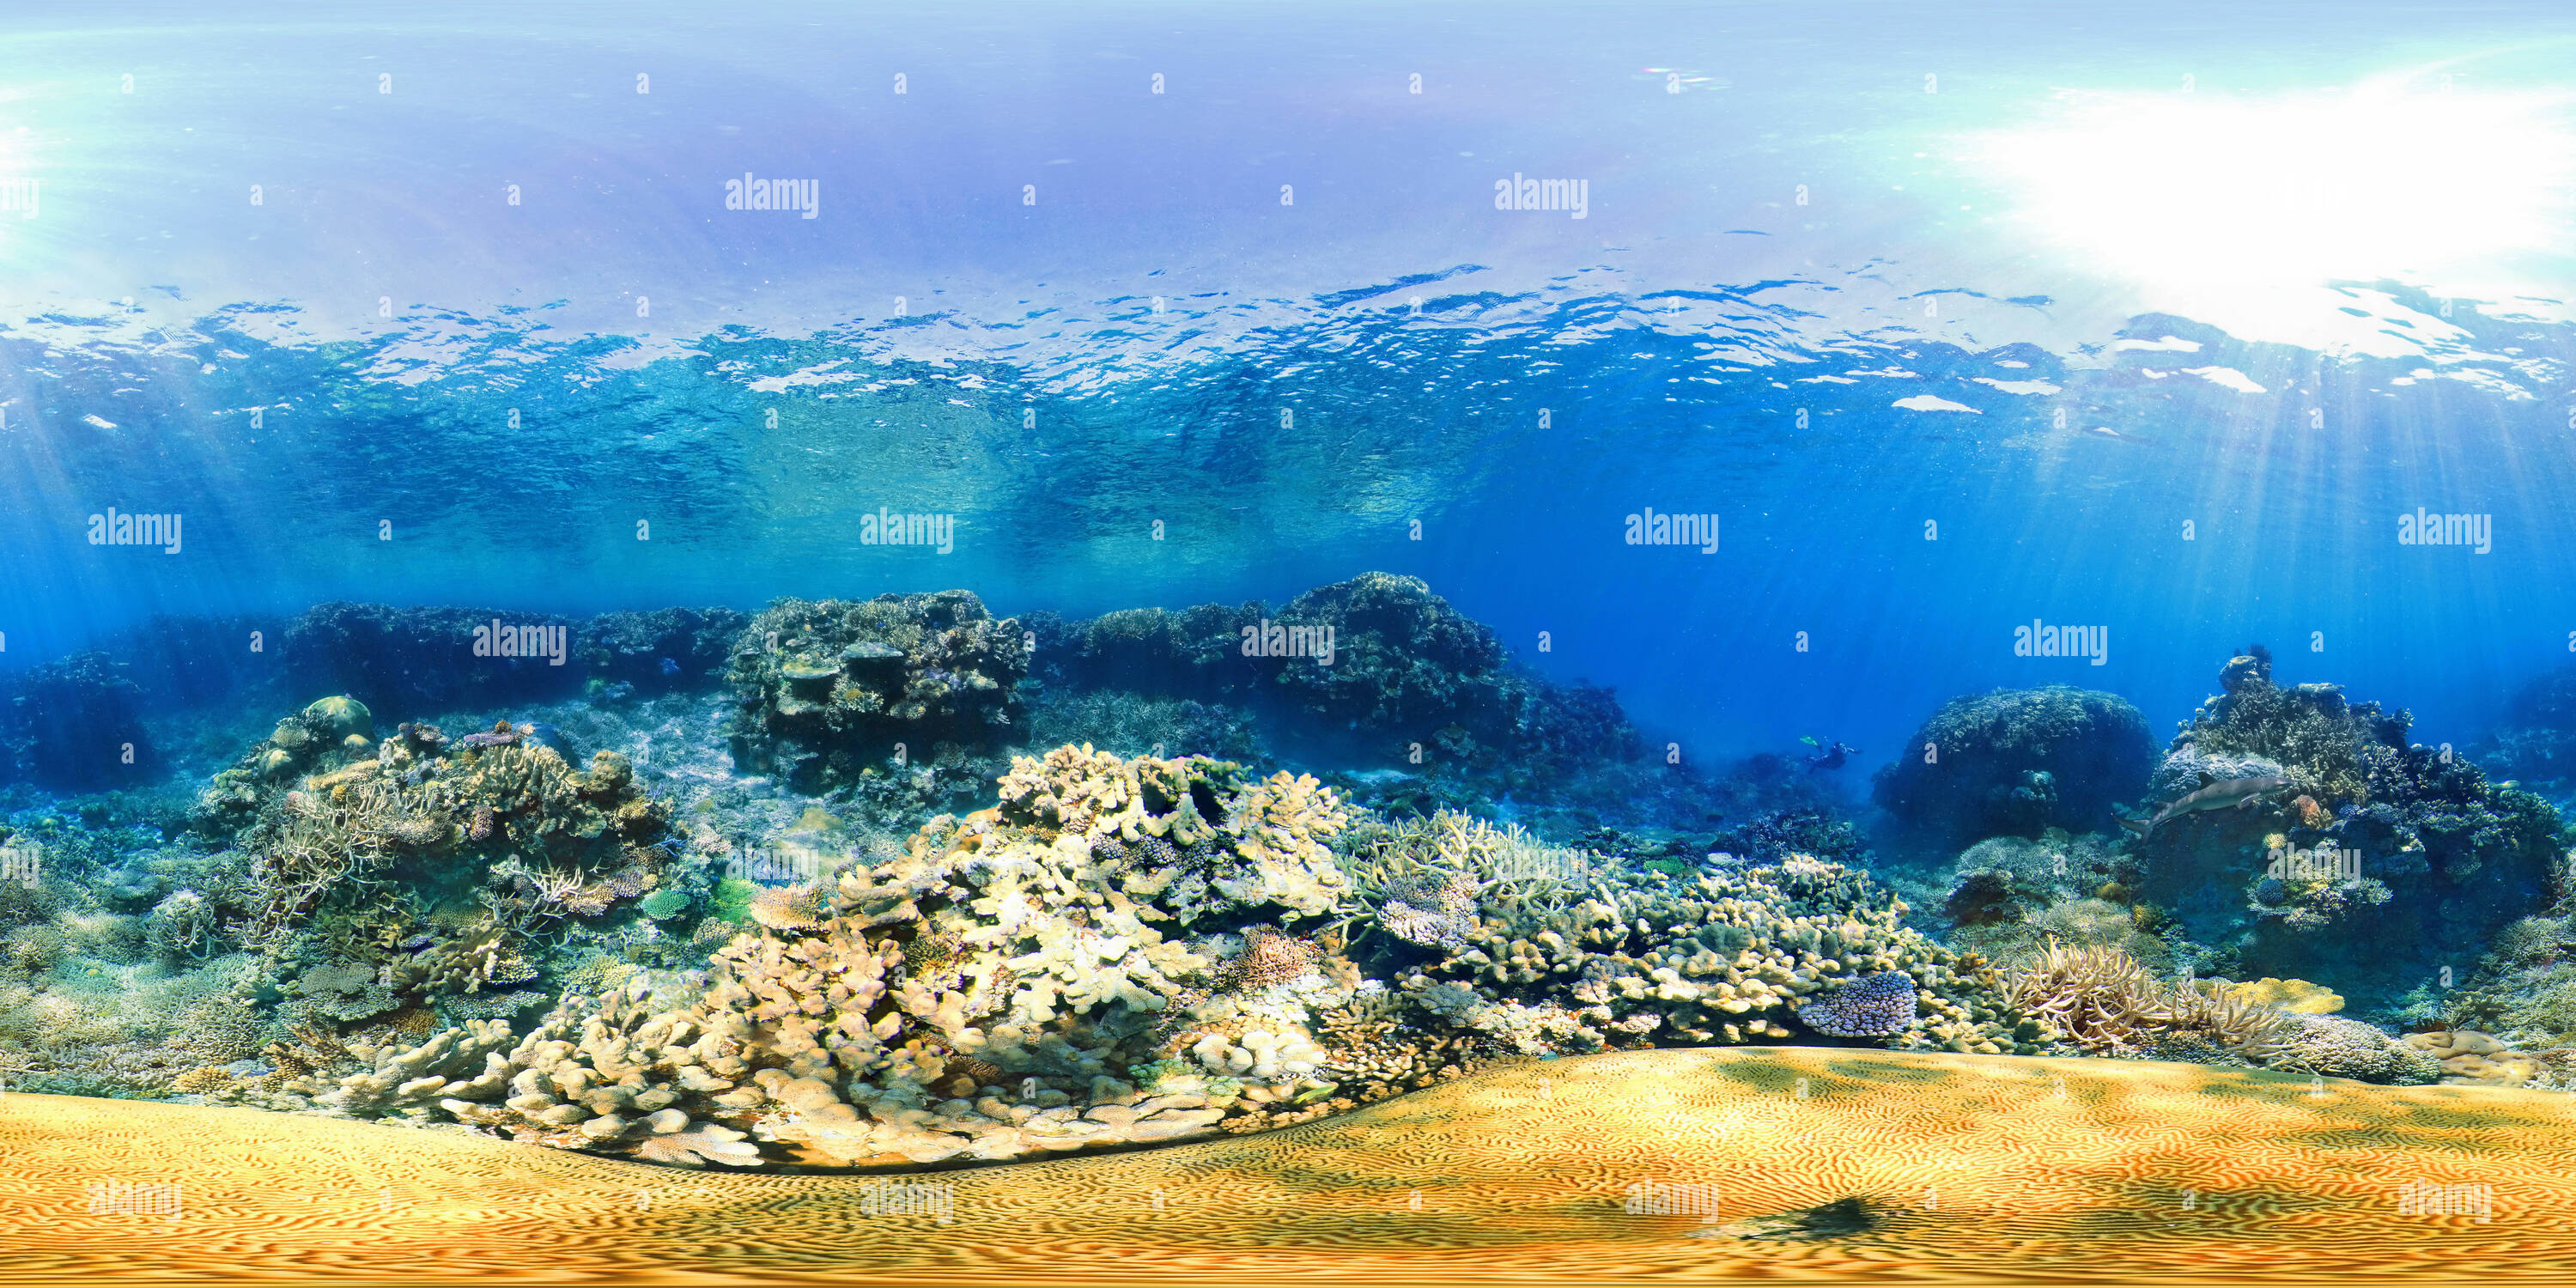 360 degree panoramic view of Underwater virtual reality photography in New Caledonia